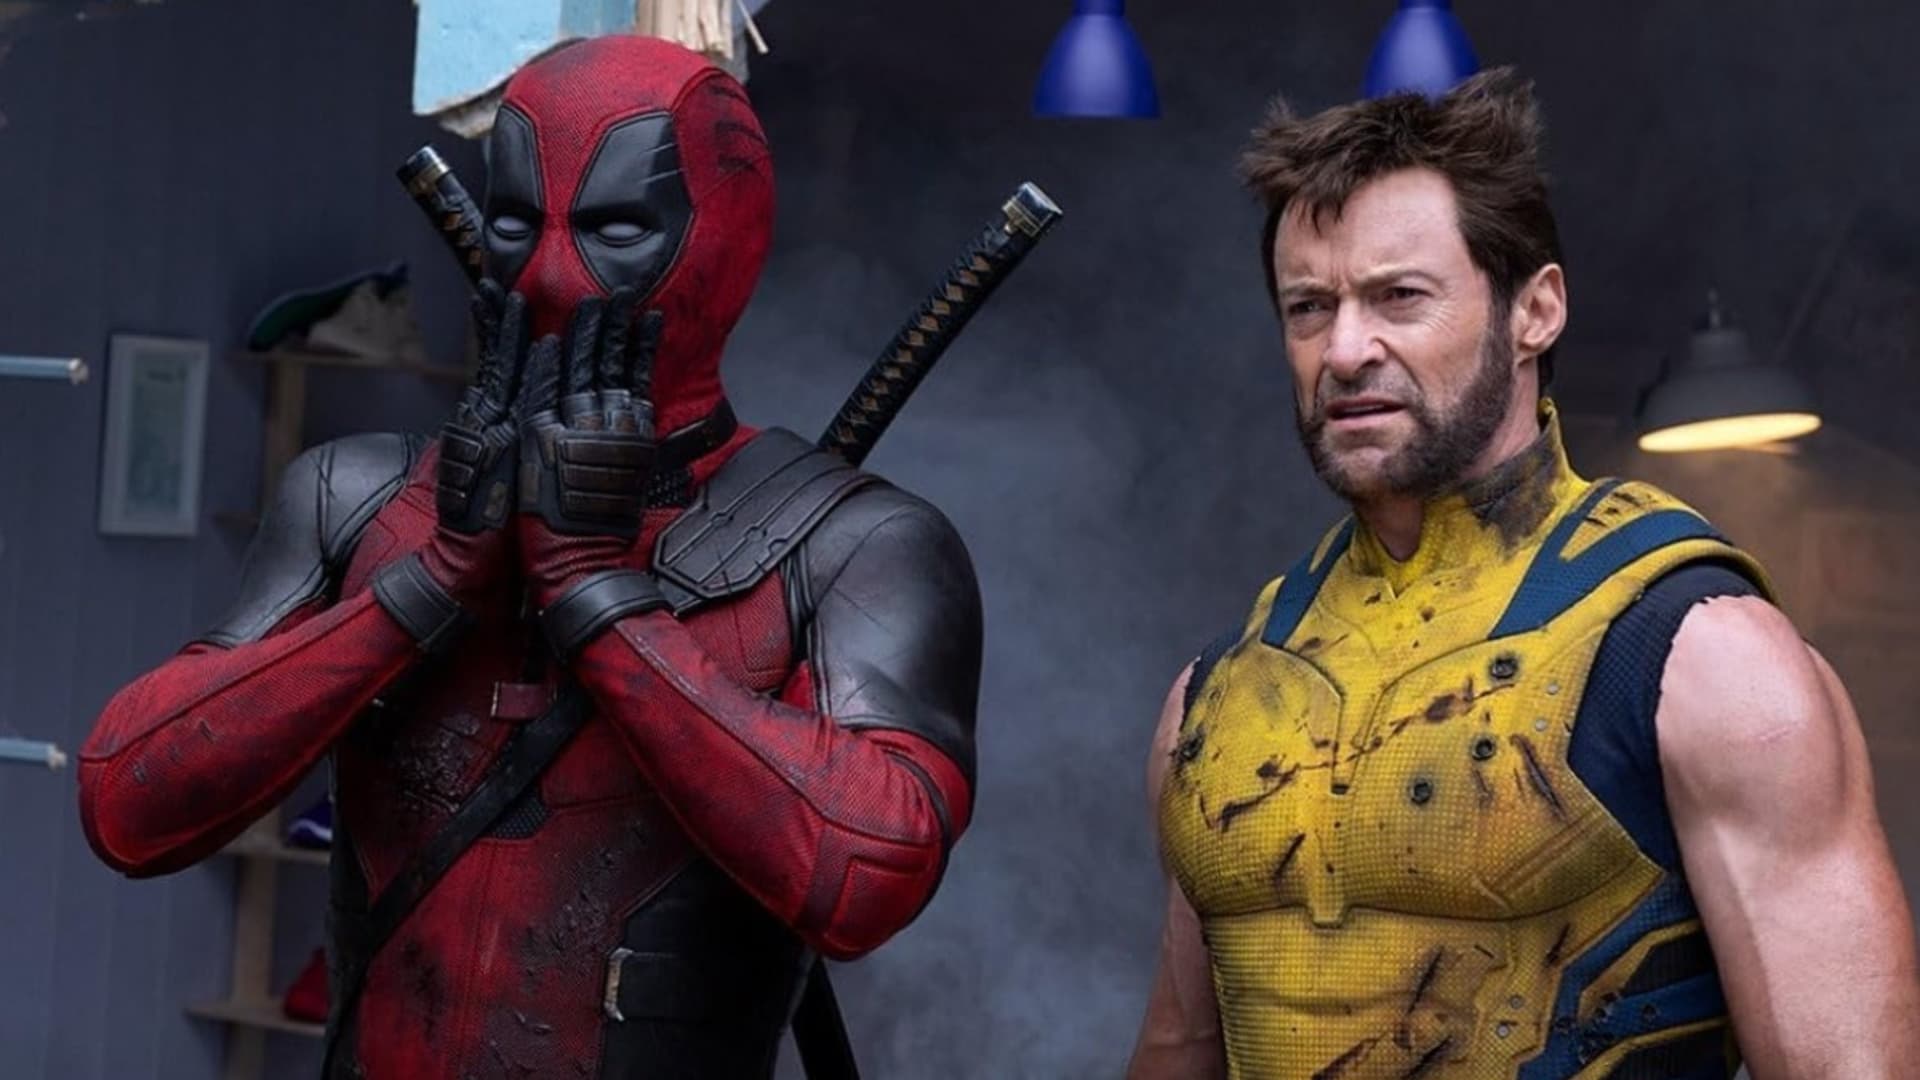 Deadpool and Wolverine box office previews Thursday